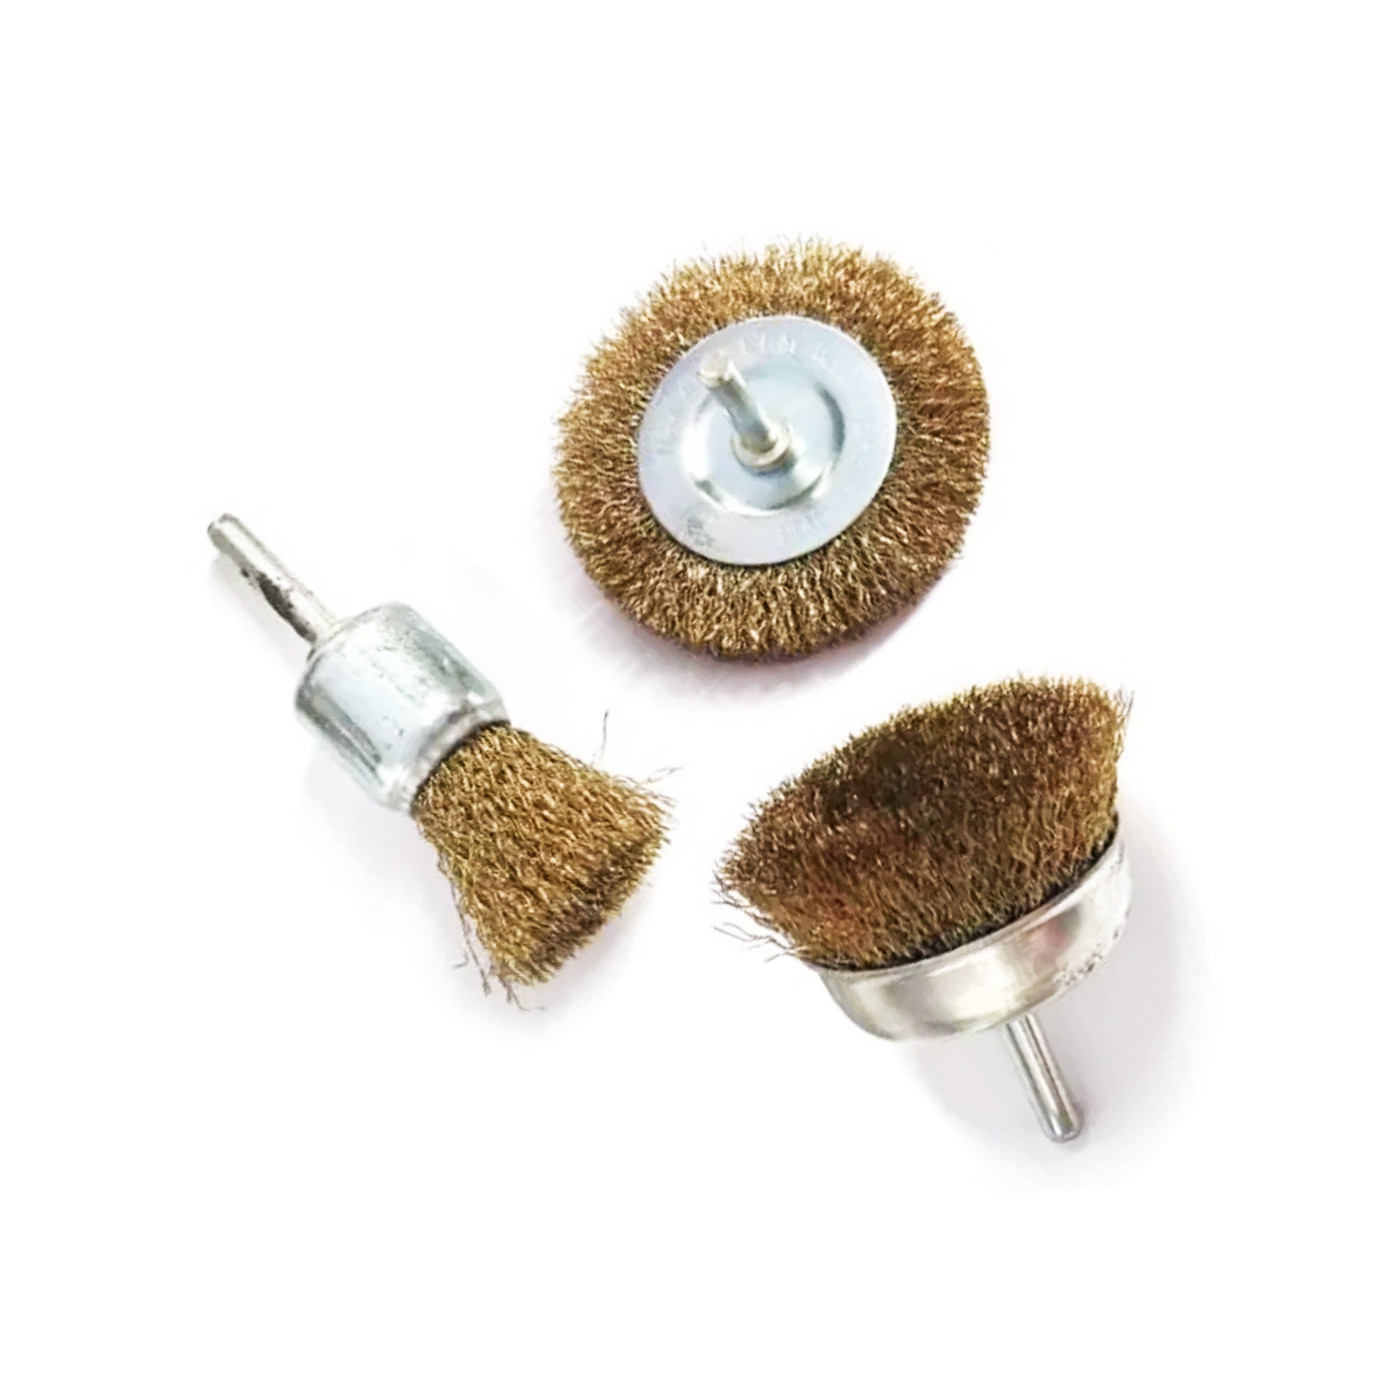 Set of 3 metal brushes (6.35 mm shaft) for electric drill